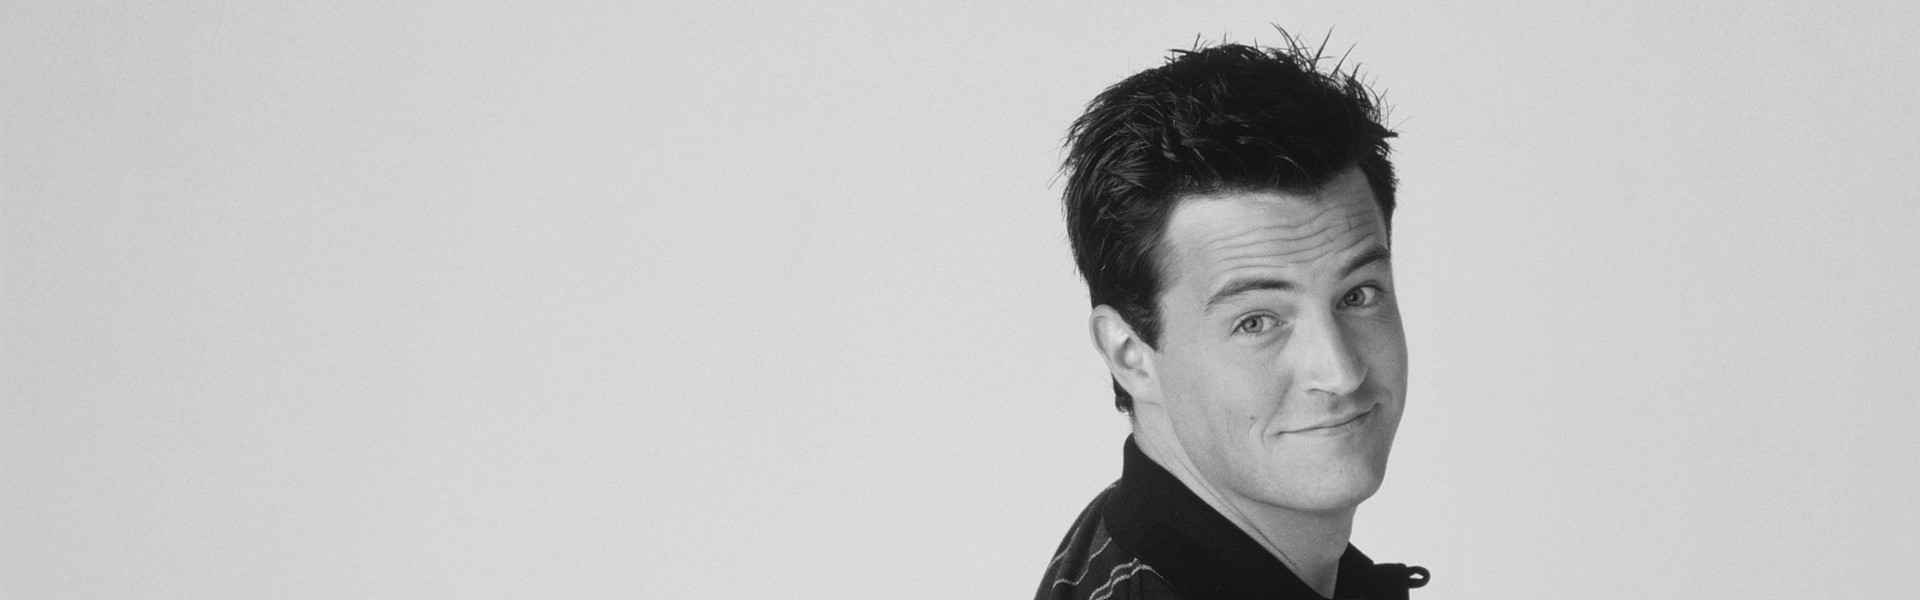 Matthew Perry has passed away. The unforgettable Chandler from the TV series “Friends” was 54 years old.